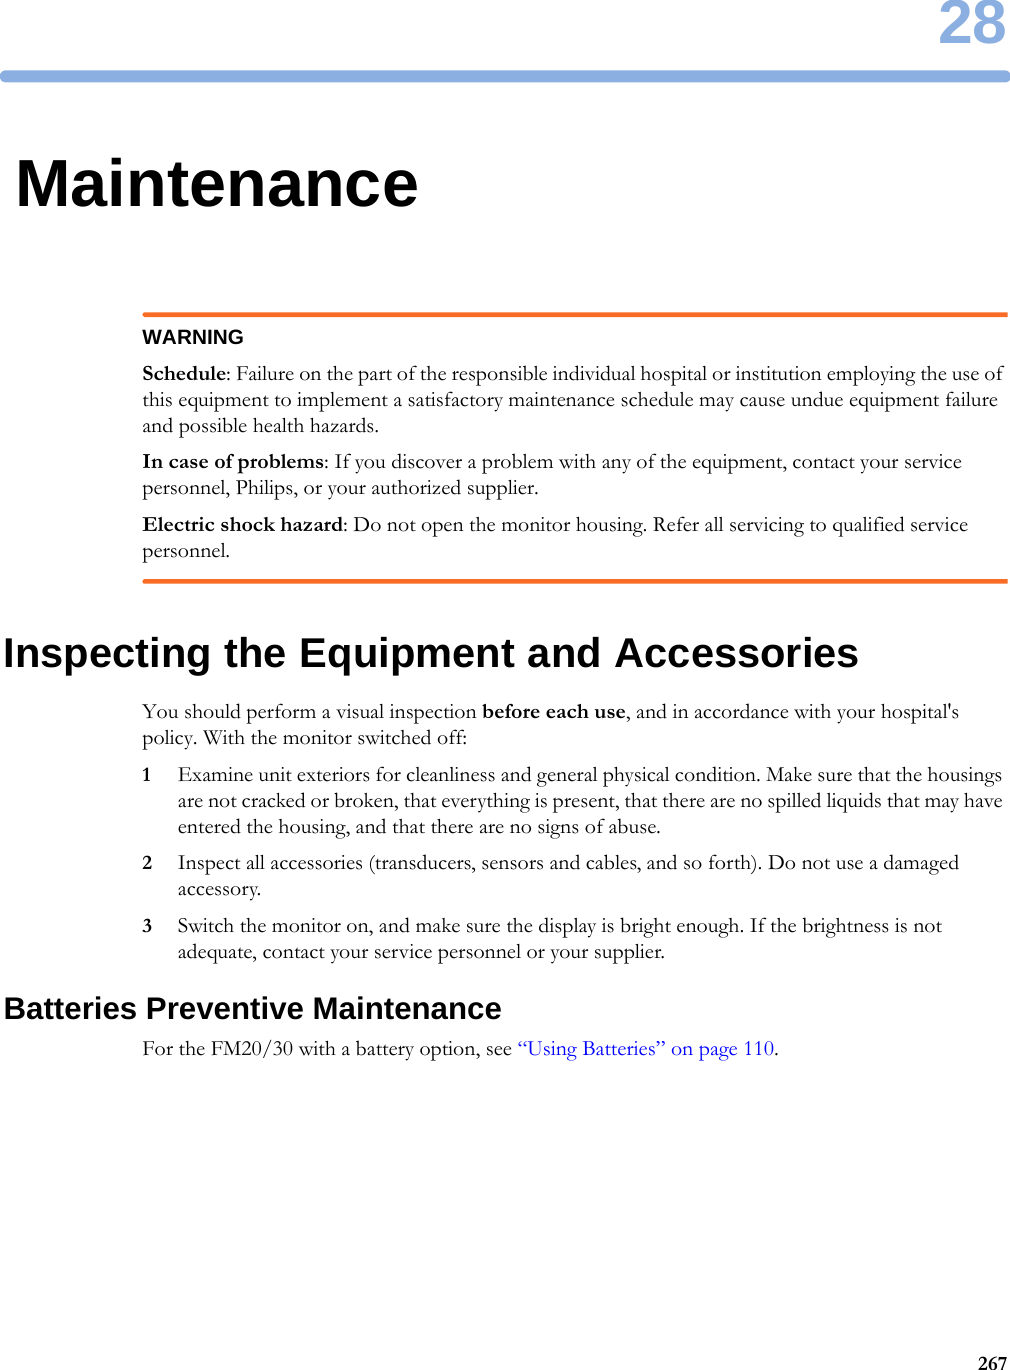 2826728MaintenanceWARNINGSchedule: Failure on the part of the responsible individual hospital or institution employing the use of this equipment to implement a satisfactory maintenance schedule may cause undue equipment failure and possible health hazards.In case of problems: If you discover a problem with any of the equipment, contact your service personnel, Philips, or your authorized supplier.Electric shock hazard: Do not open the monitor housing. Refer all servicing to qualified service personnel.Inspecting the Equipment and AccessoriesYou should perform a visual inspection before each use, and in accordance with your hospital&apos;s policy. With the monitor switched off:1Examine unit exteriors for cleanliness and general physical condition. Make sure that the housings are not cracked or broken, that everything is present, that there are no spilled liquids that may have entered the housing, and that there are no signs of abuse.2Inspect all accessories (transducers, sensors and cables, and so forth). Do not use a damaged accessory.3Switch the monitor on, and make sure the display is bright enough. If the brightness is not adequate, contact your service personnel or your supplier.Batteries Preventive MaintenanceFor the FM20/30 with a battery option, see “Using Batteries” on page 110.